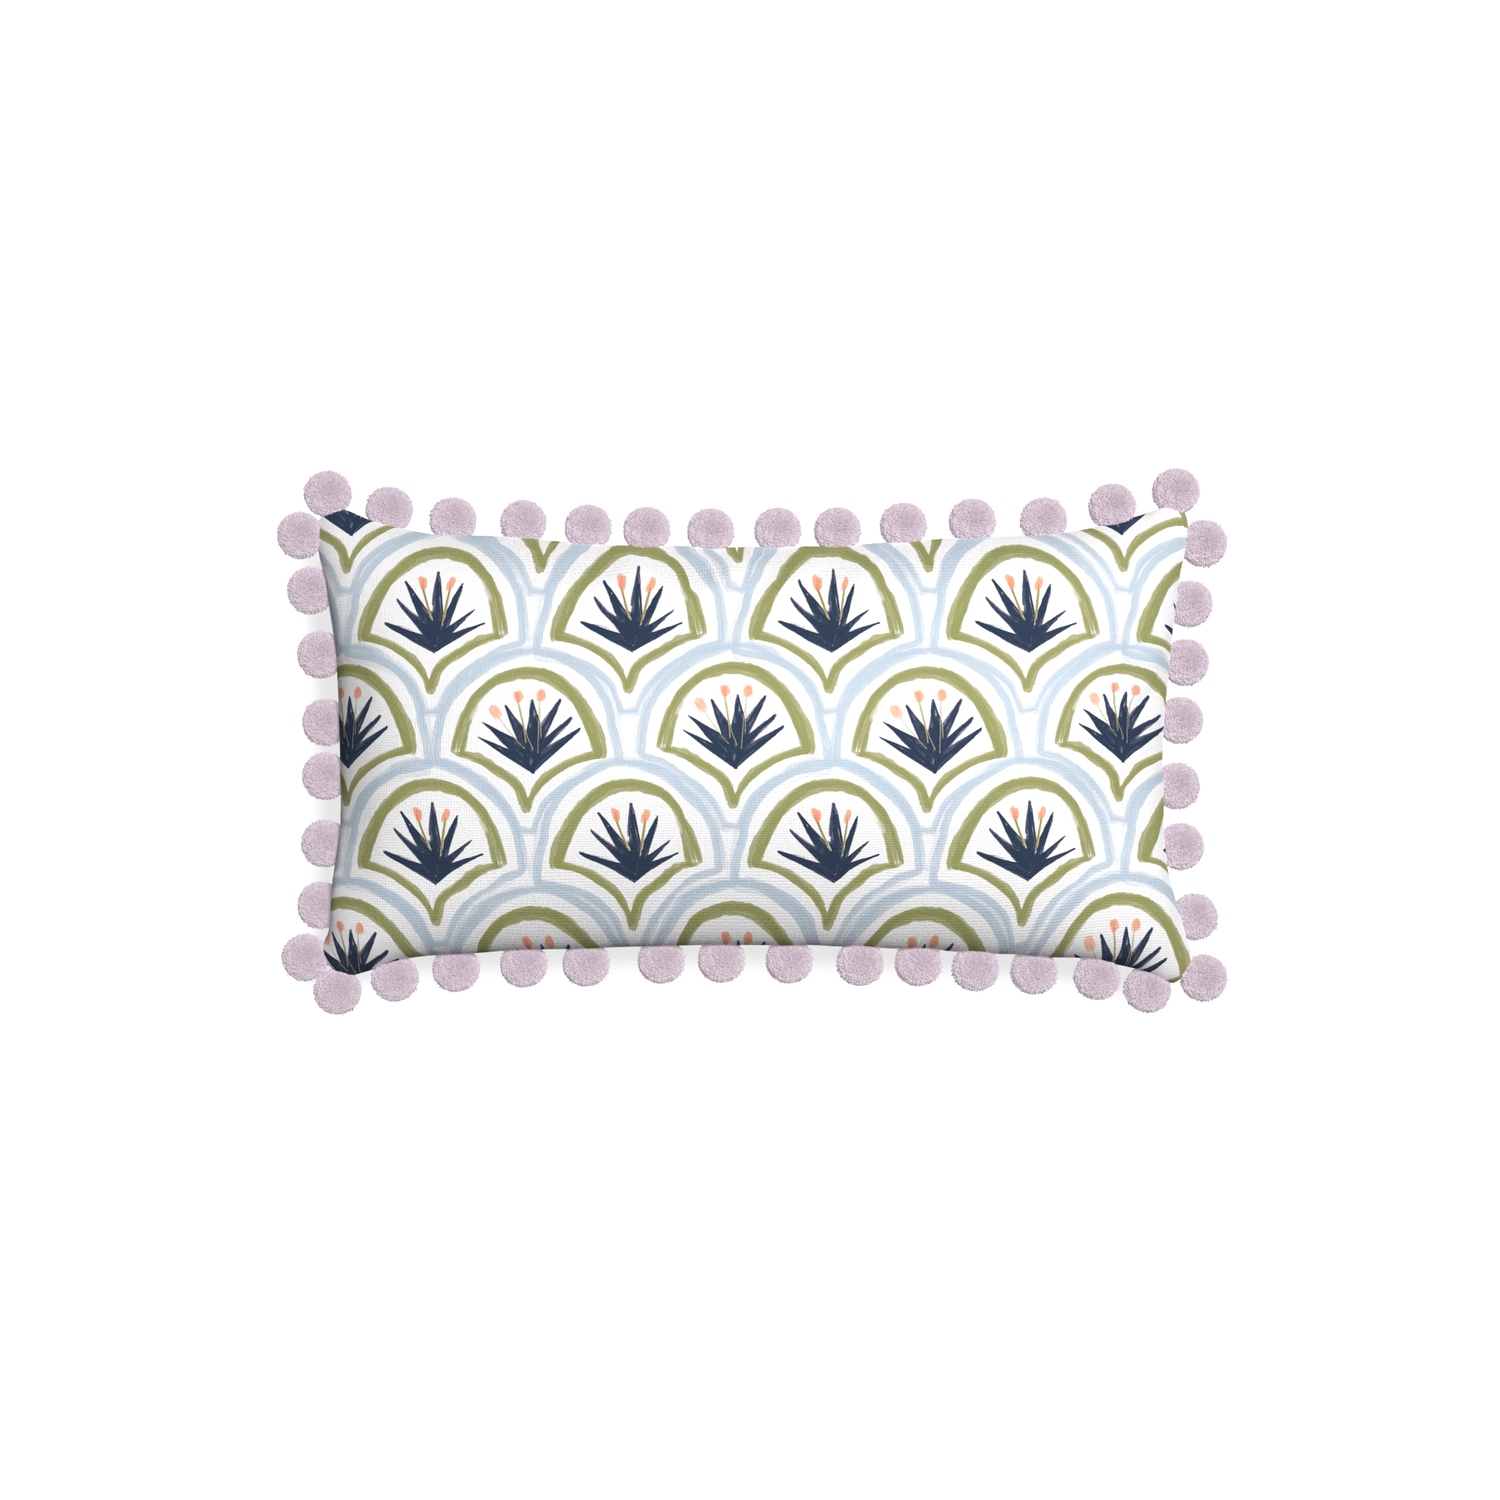 Petite-lumbar thatcher midnight custom art deco palm patternpillow with l on white background